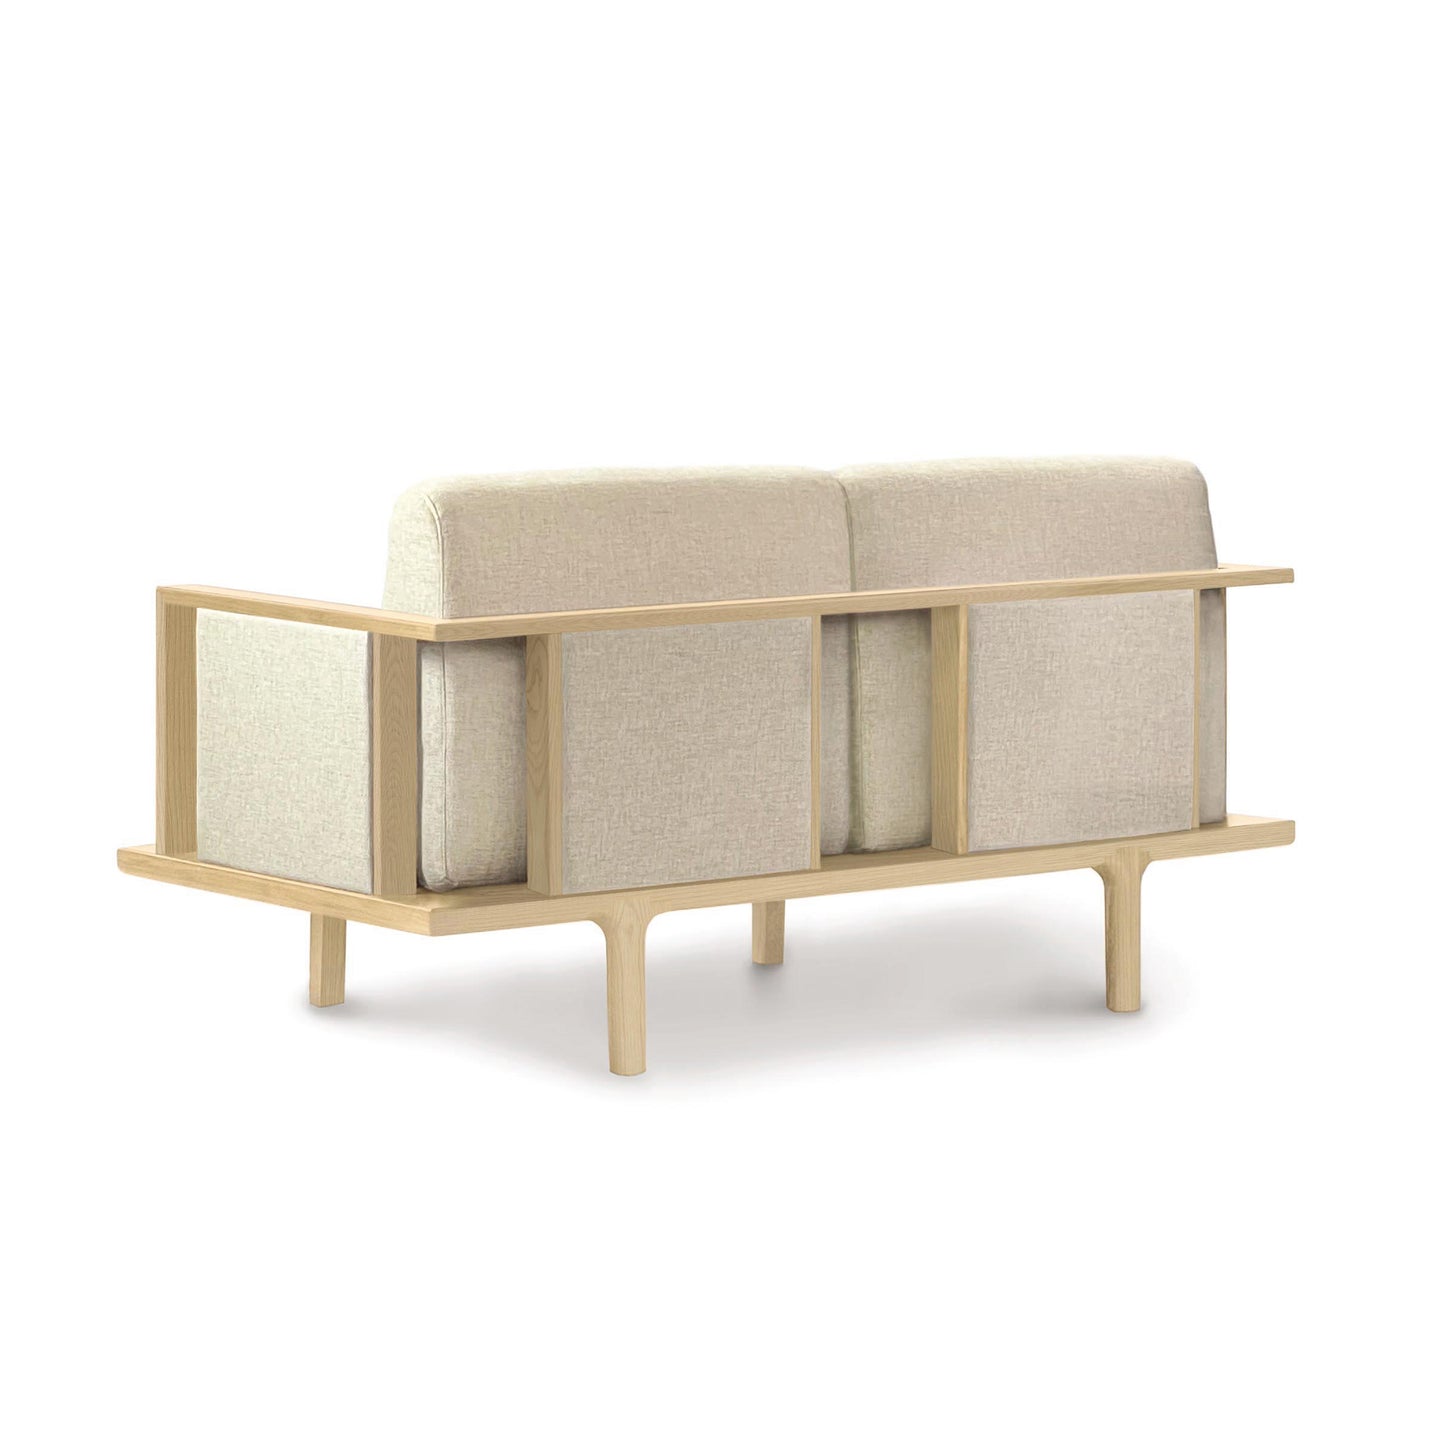 Sierra Oak Upholstered Loveseat with Upholstered Panels by Copeland Furniture, featuring a minimalist design with side and back wooden panels.